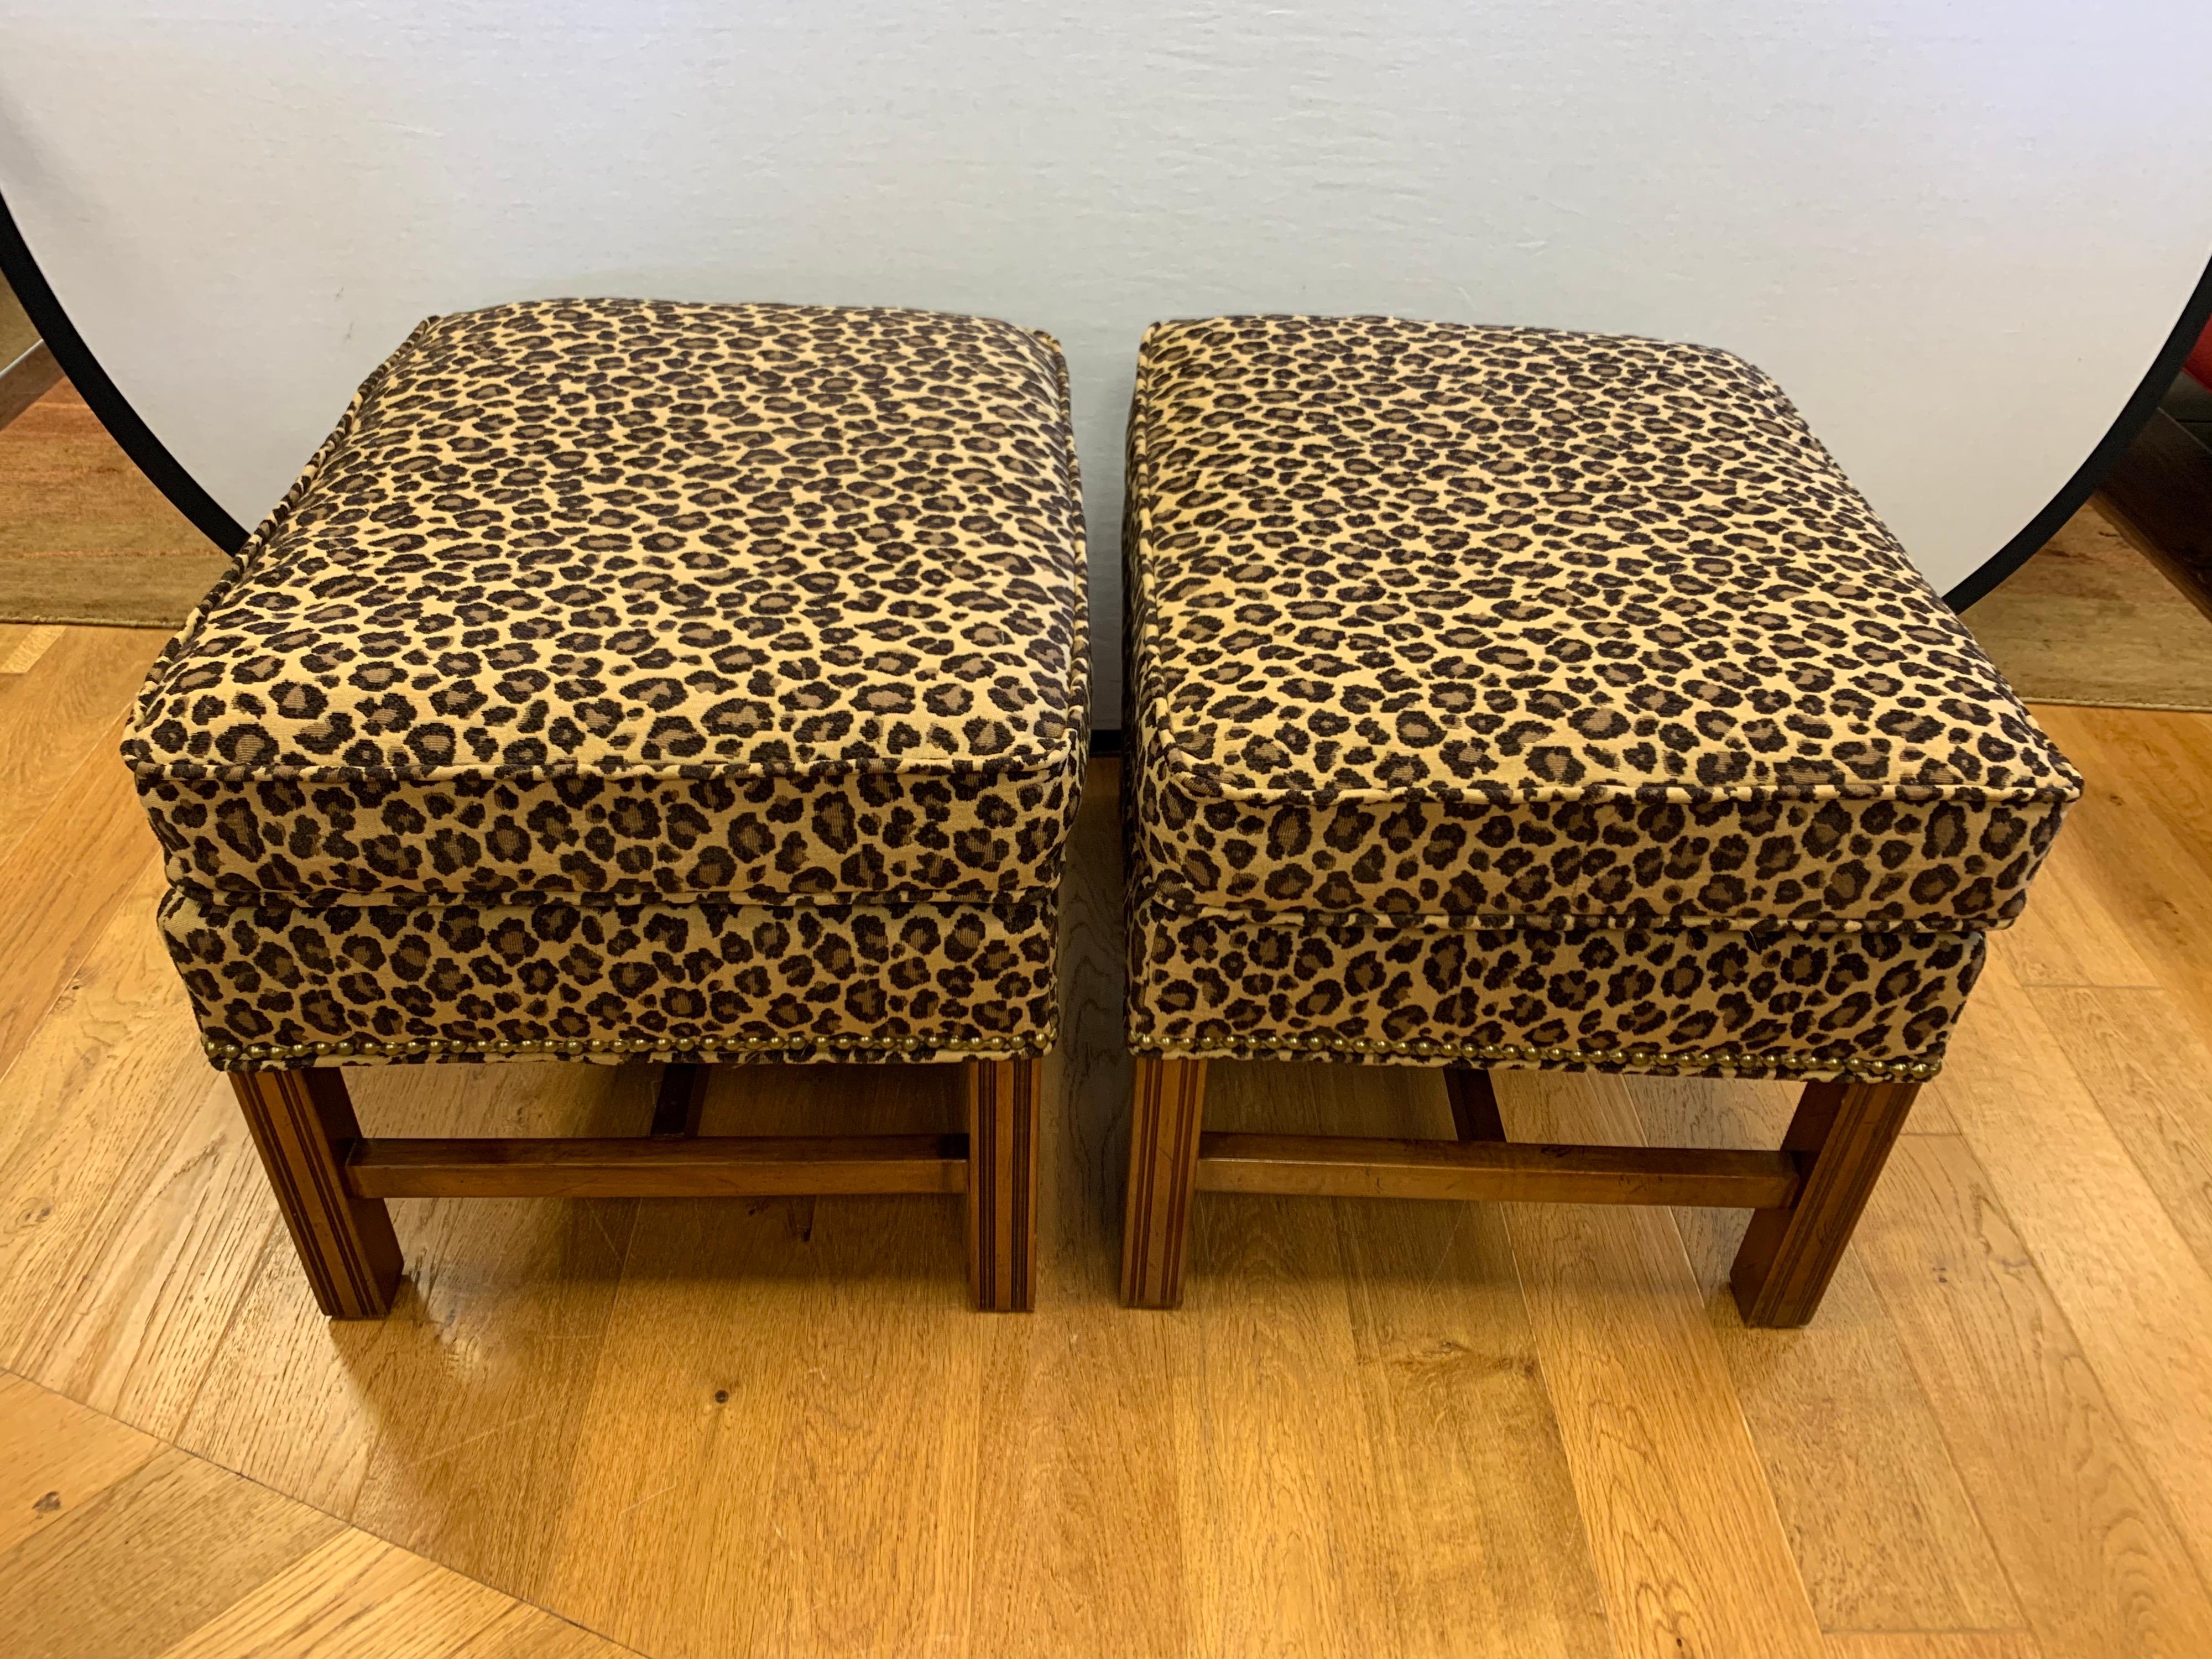 Elegant, newly upholstered in leopard print ottomans poufs with nailheads all around.
The manufacturer is Bernhardt Furniture. Made in the USA. Great scale, not too big, not
too small.